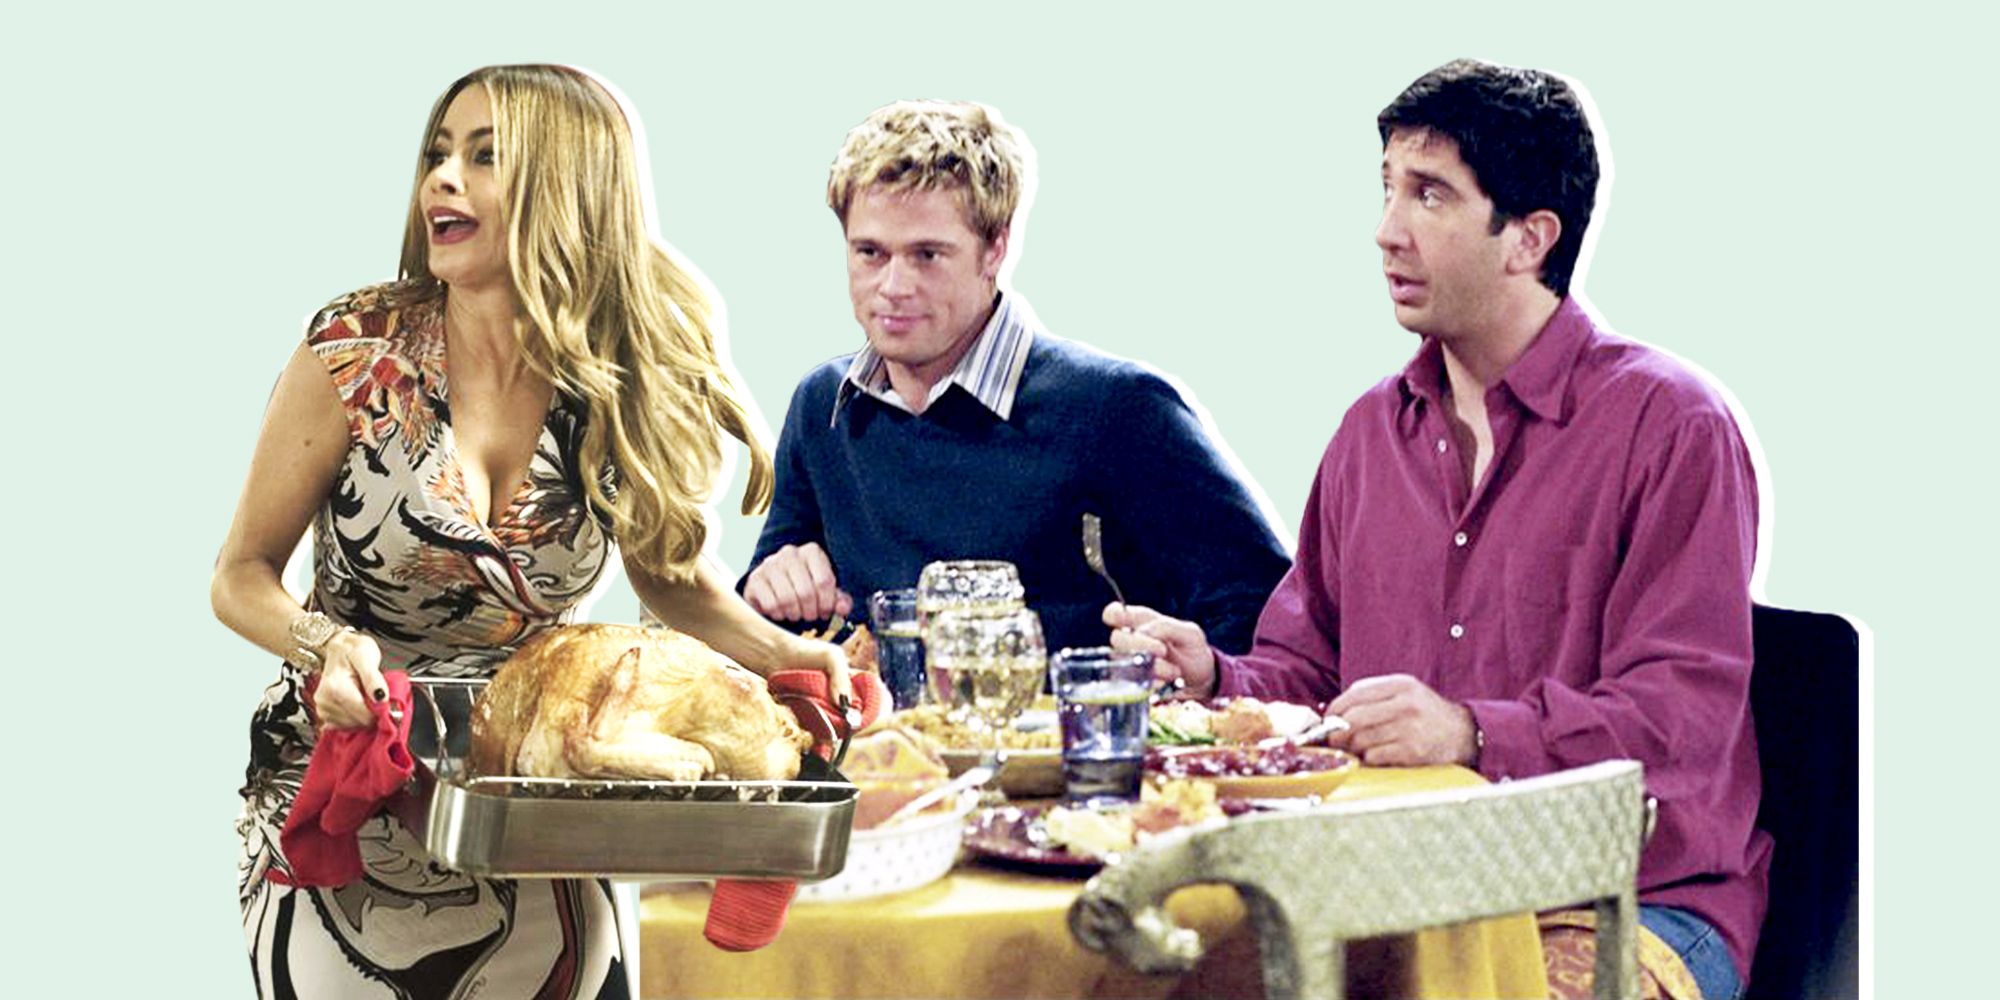 15 Best Thanksgiving-Themed TV Episodes Friends, Master of None, and More